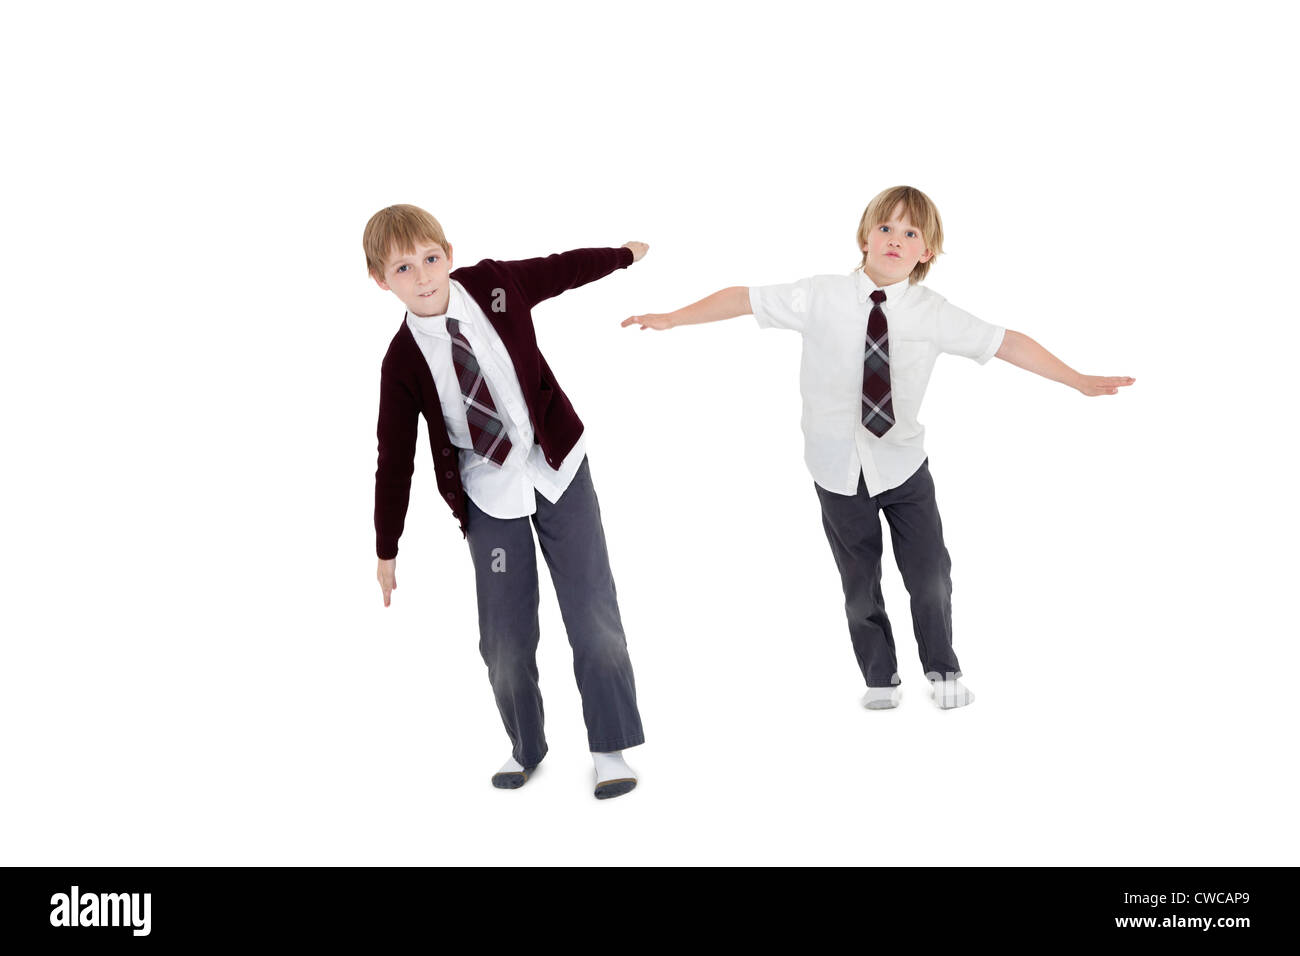 Boys with arms outstretched over white background Stock Photo